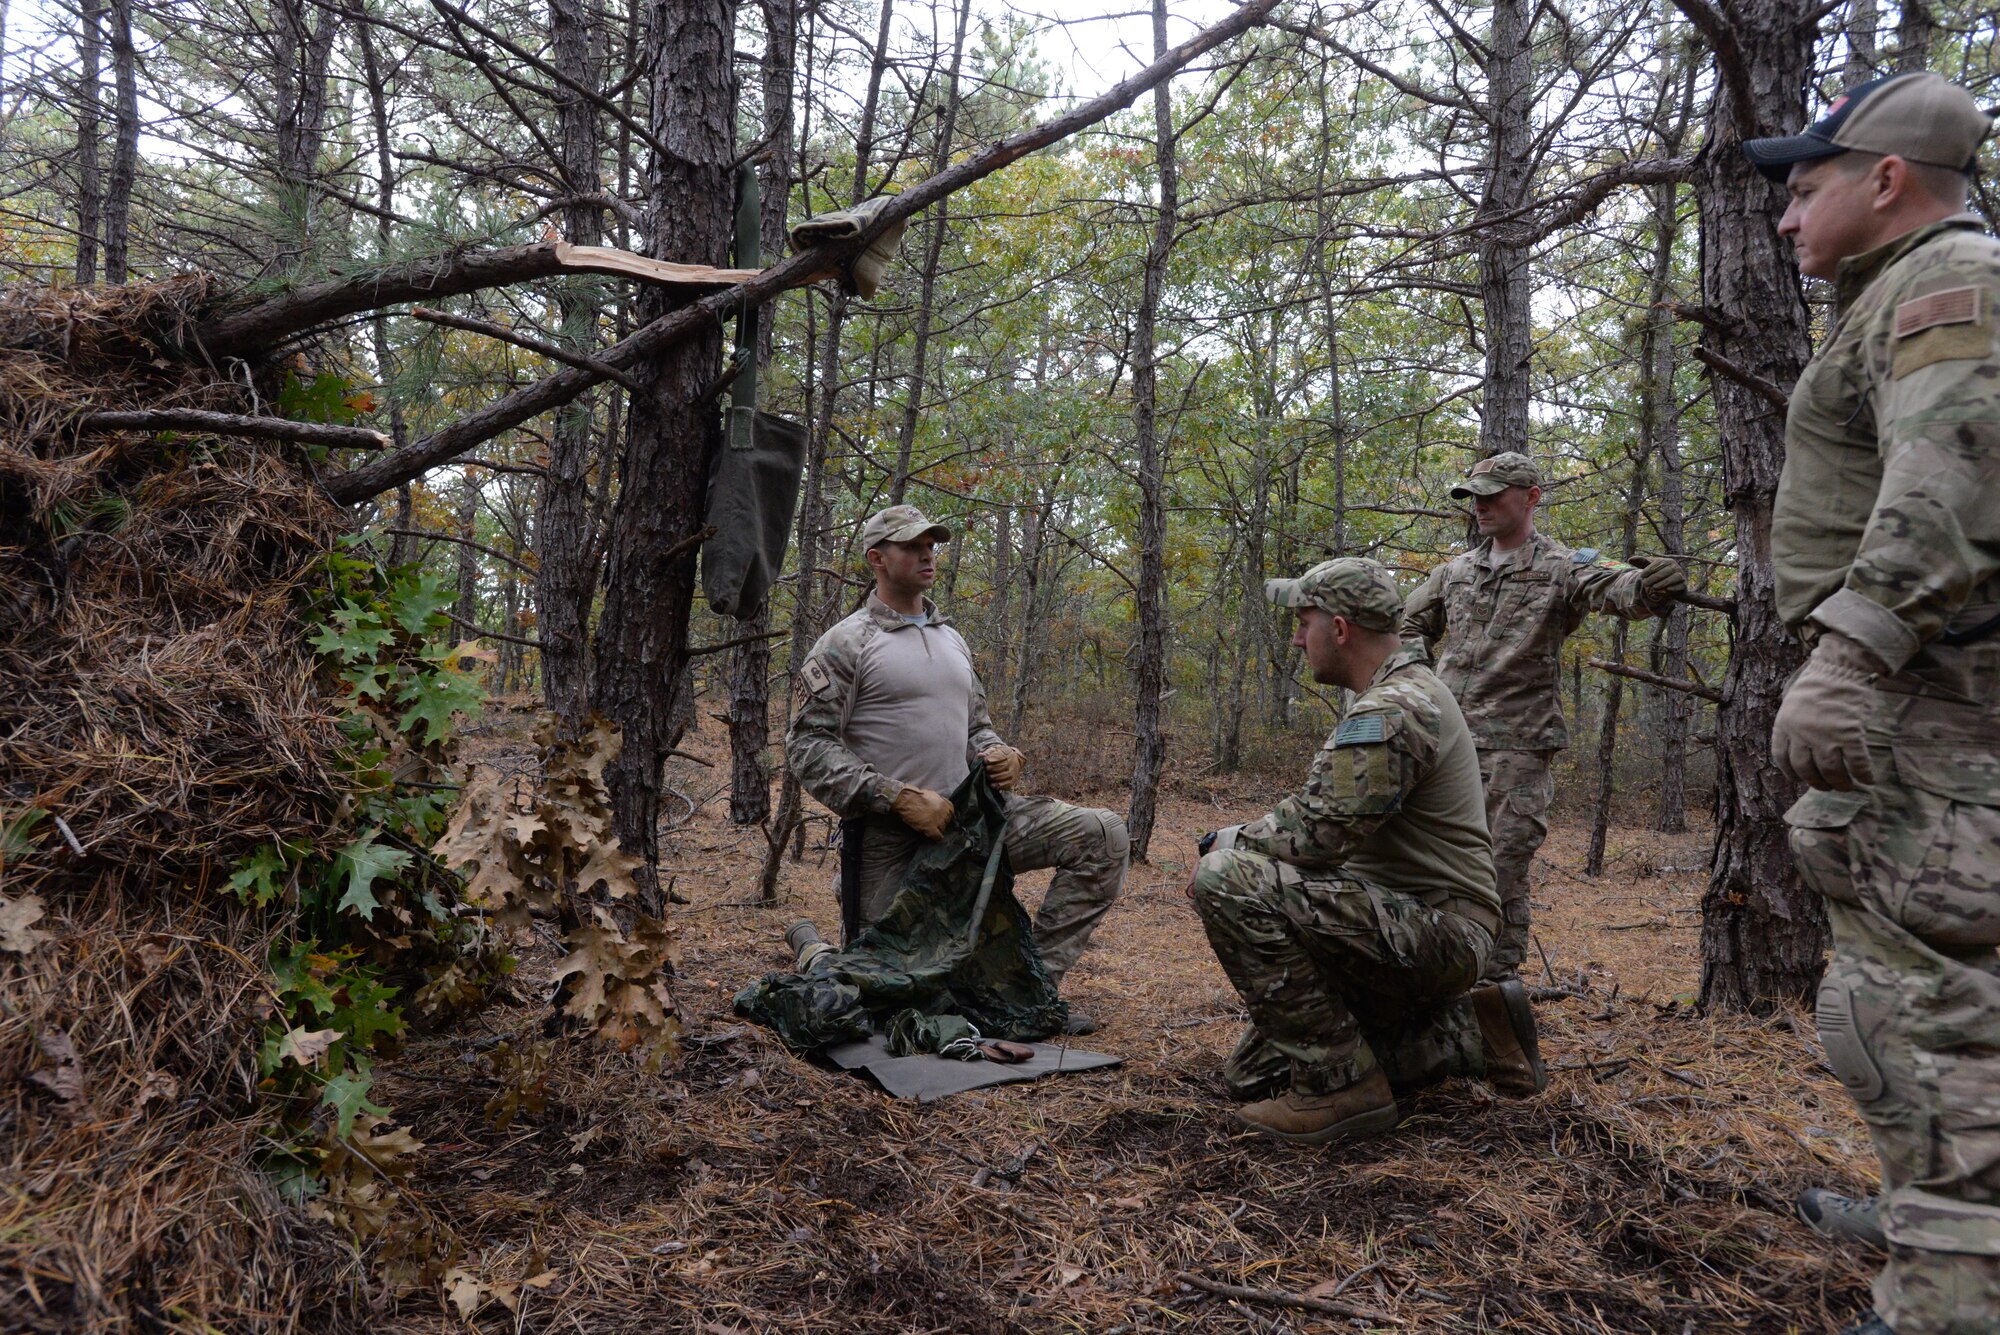 Senior Airman Alexander Triani, a pararescueman with the 103rd Rescue Squadron of the 106th Rescue Wing assigned to the New York Air National Guard, demonstrates how to make a mattress from a used parachute in the woods of Westhampton Beach, New York November 1, 2017.